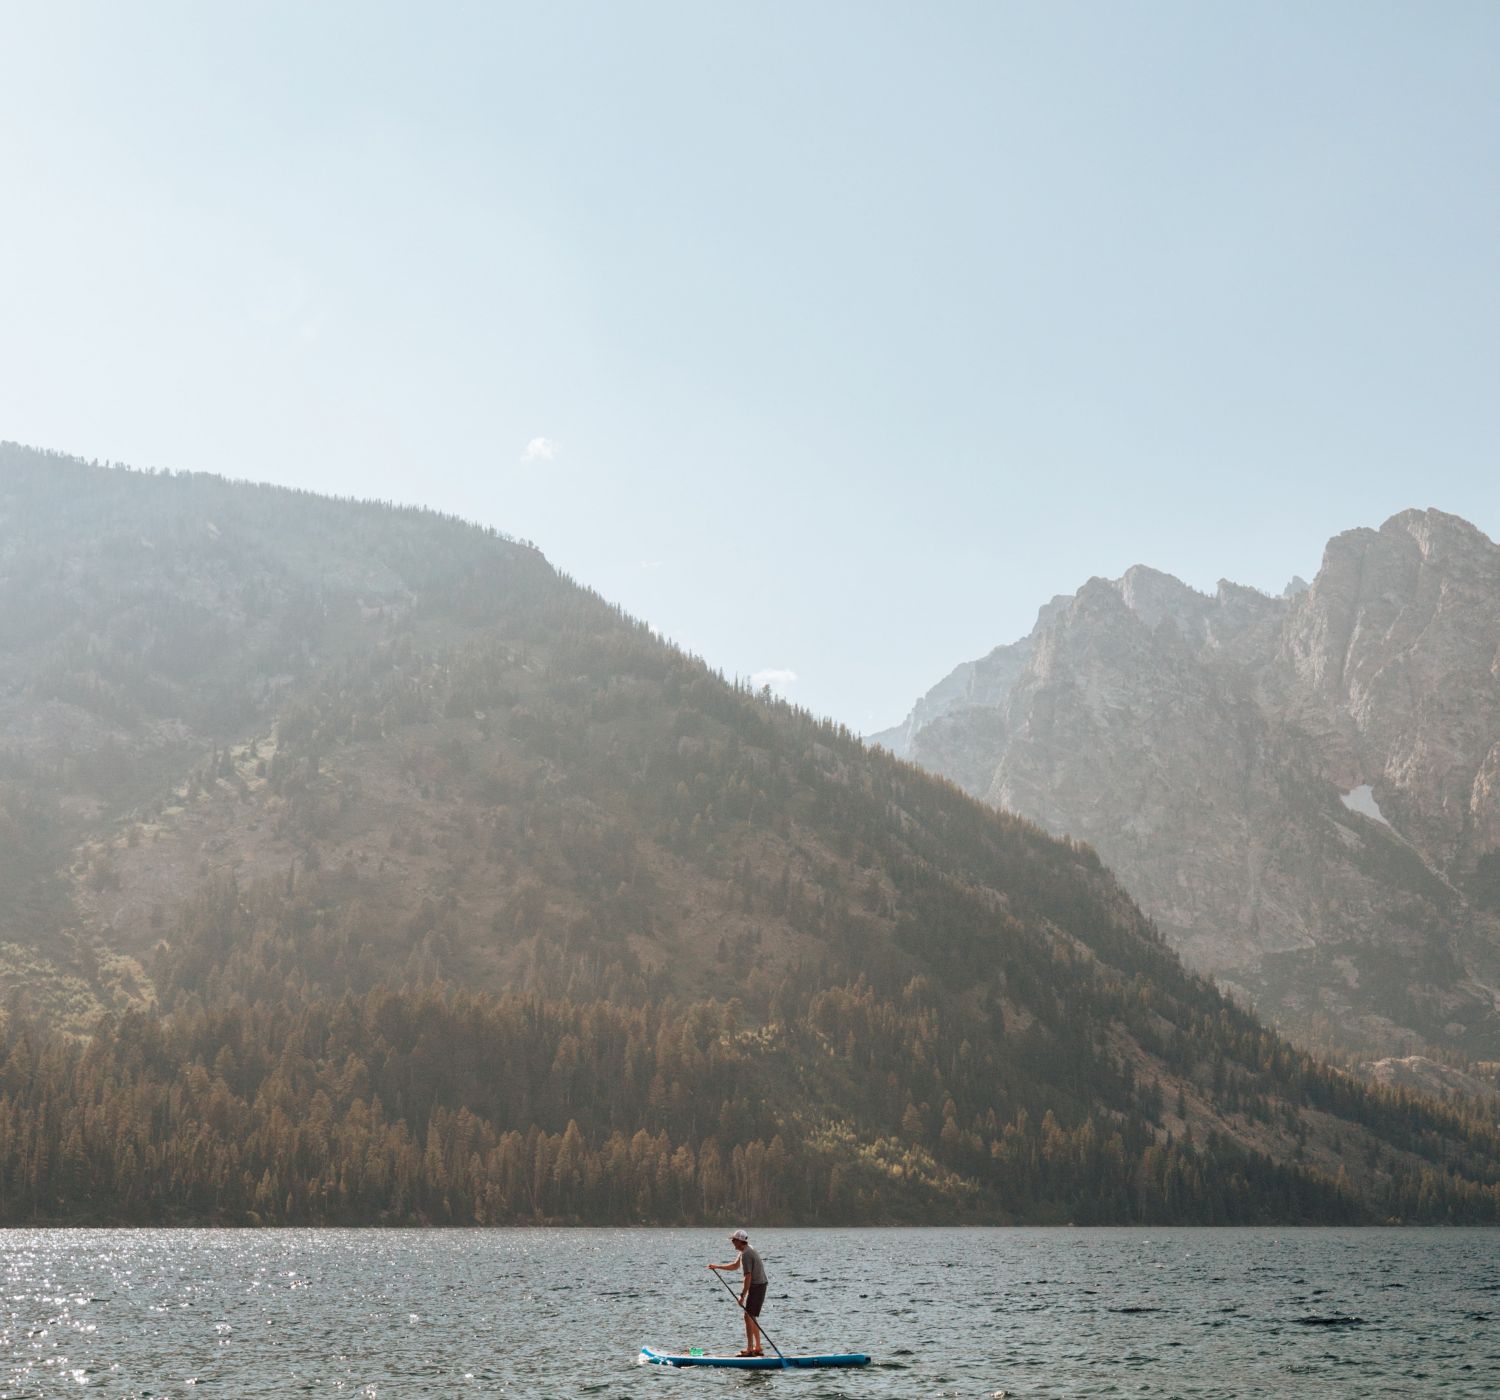 A person is paddleboarding on a lake surrounded by mountains and trees under a clear sky.